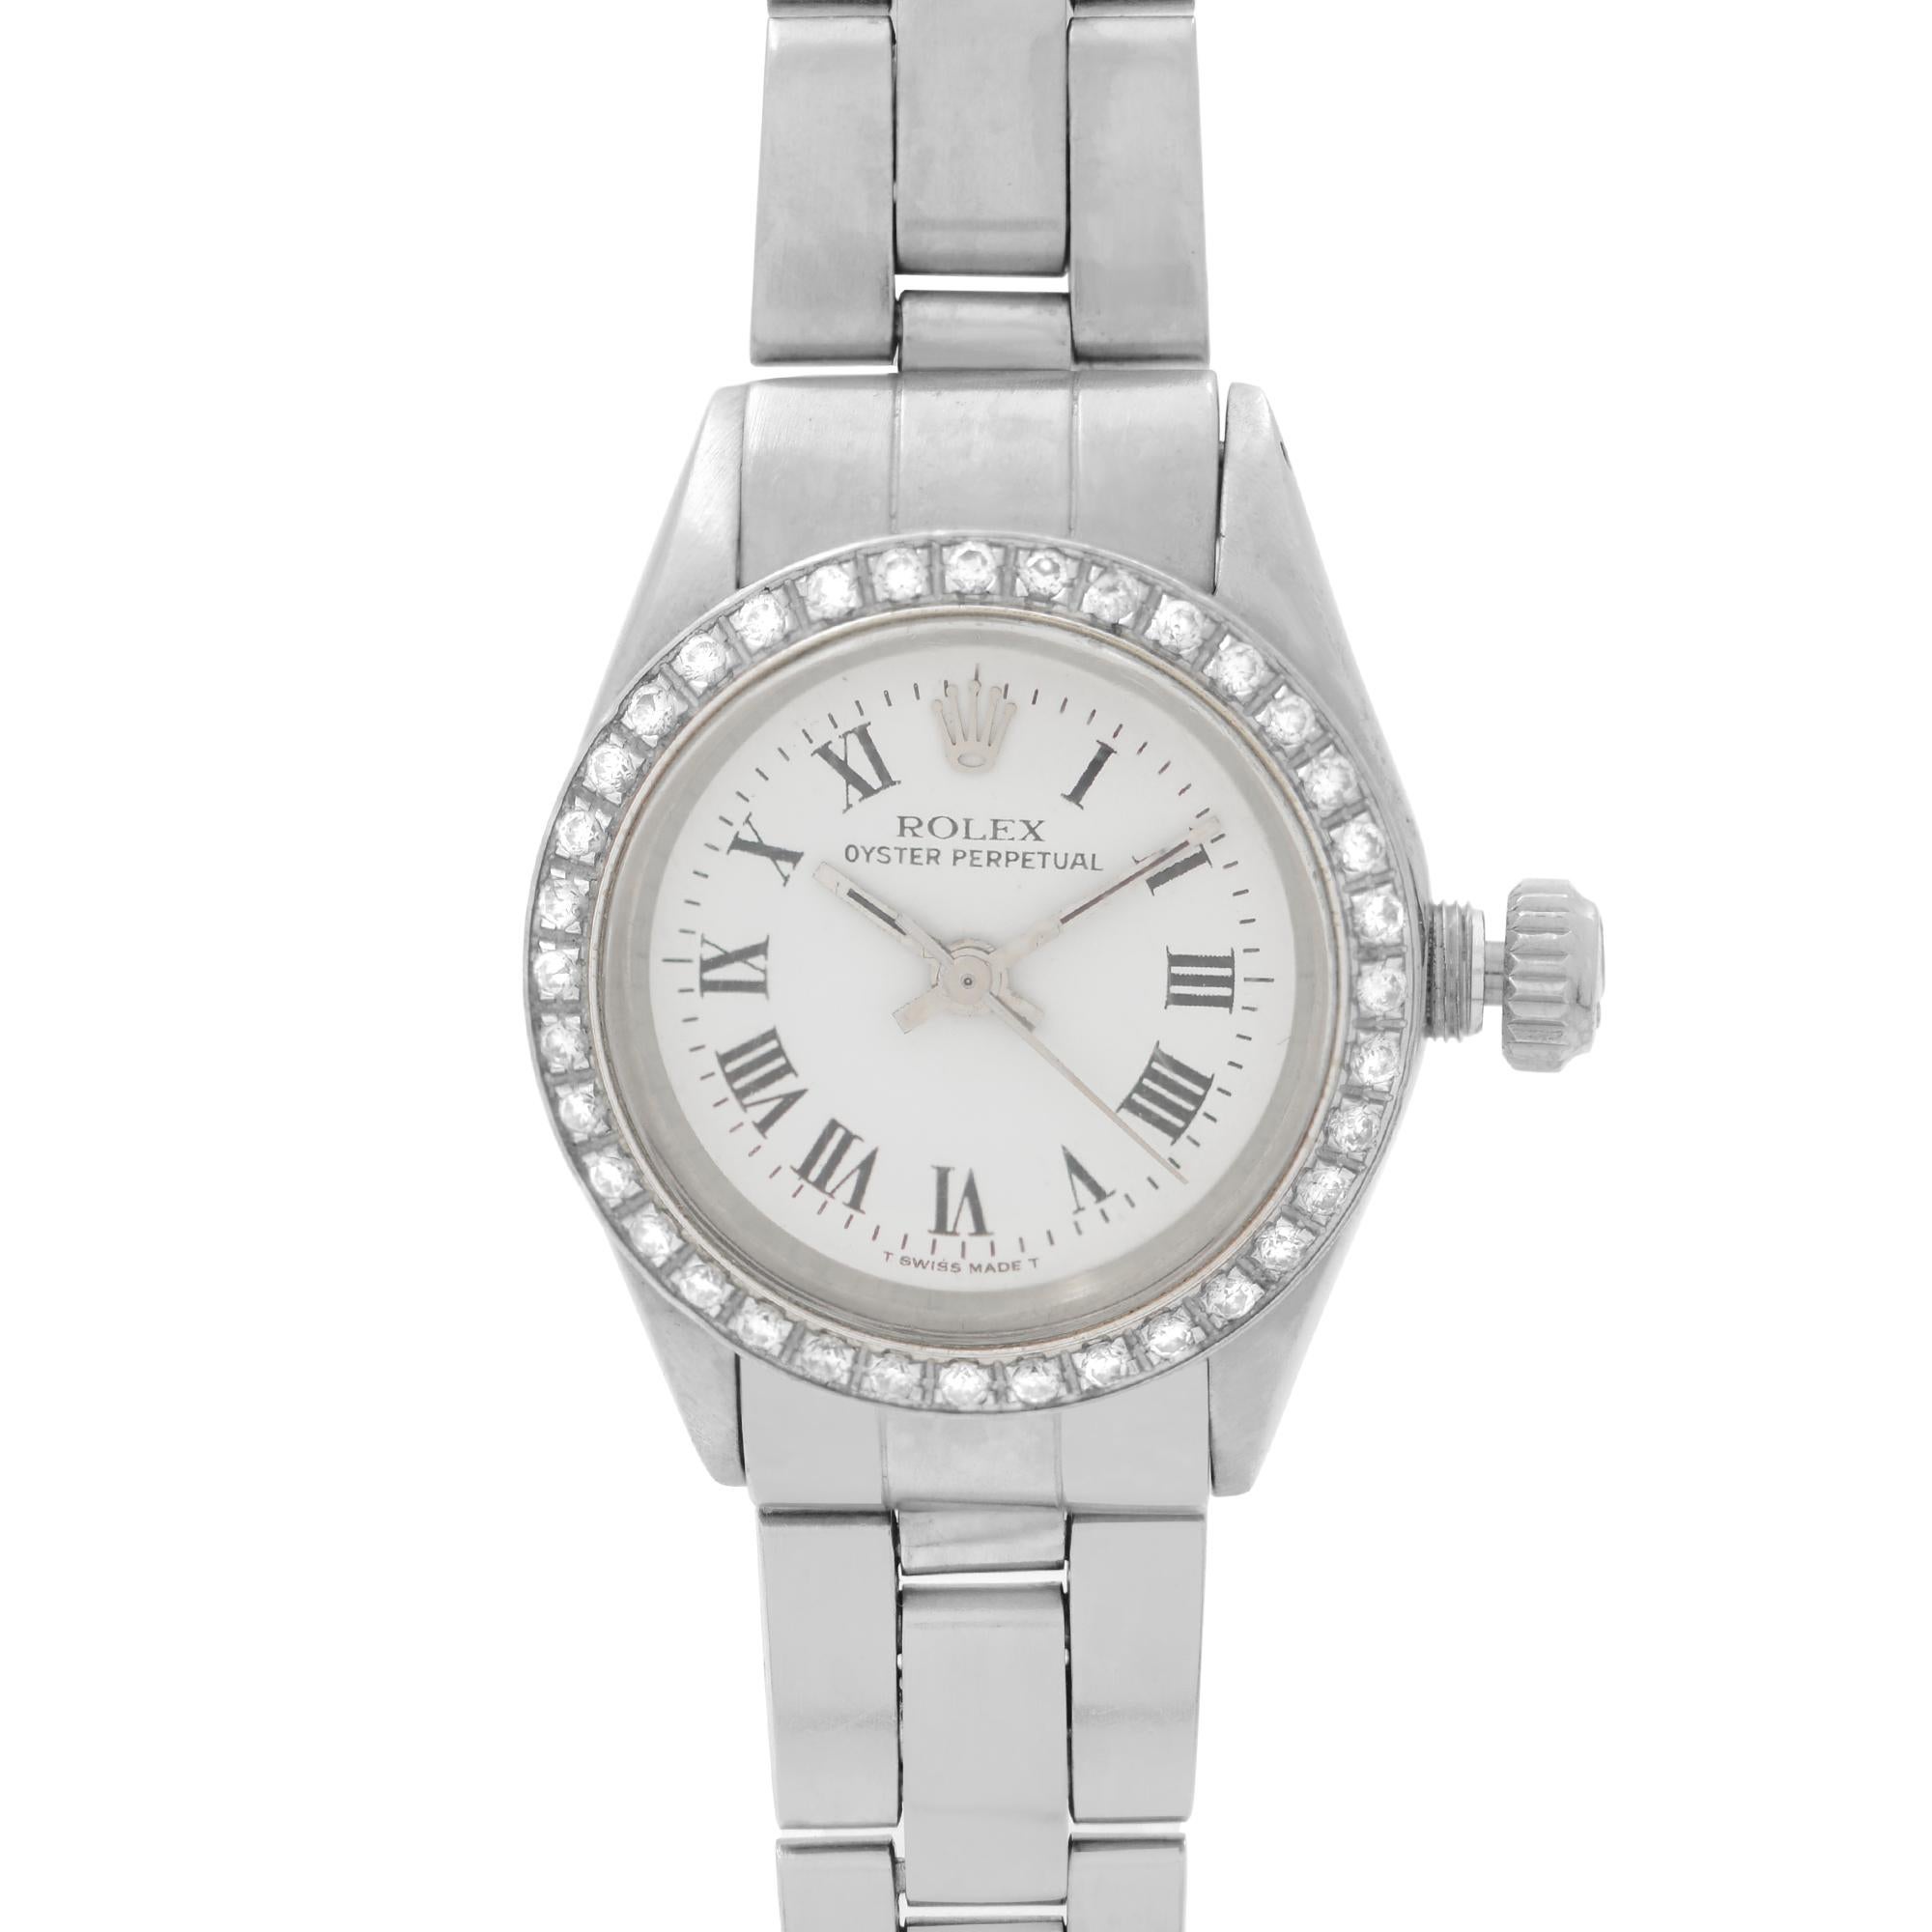 Pre Owned Rolex Oyster Perpetual Ladies Watch 6718. Custom White Gold Bezel with Diamonds. Moderate slack on the band. White Dial With Silver-Tone Hands. And Roman Numeral Hour Markers. No Original Box and Papers are Included. Comes with Chronostore